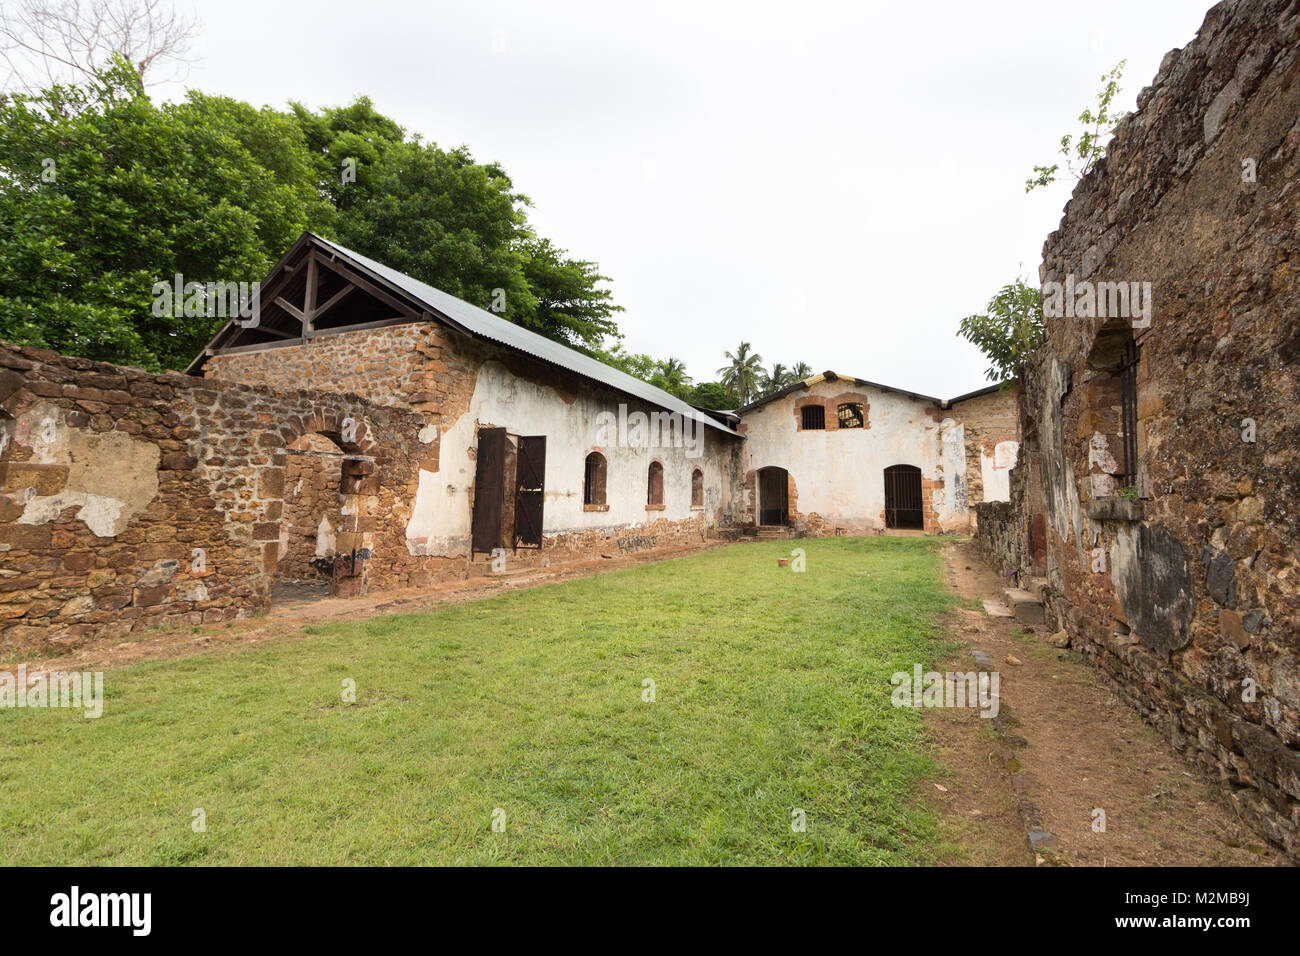 Ruins of former penal colony at Ile Royale, one of the islands of Iles du Salut (Islands of Salvation) in French Guiana. Stock Photo